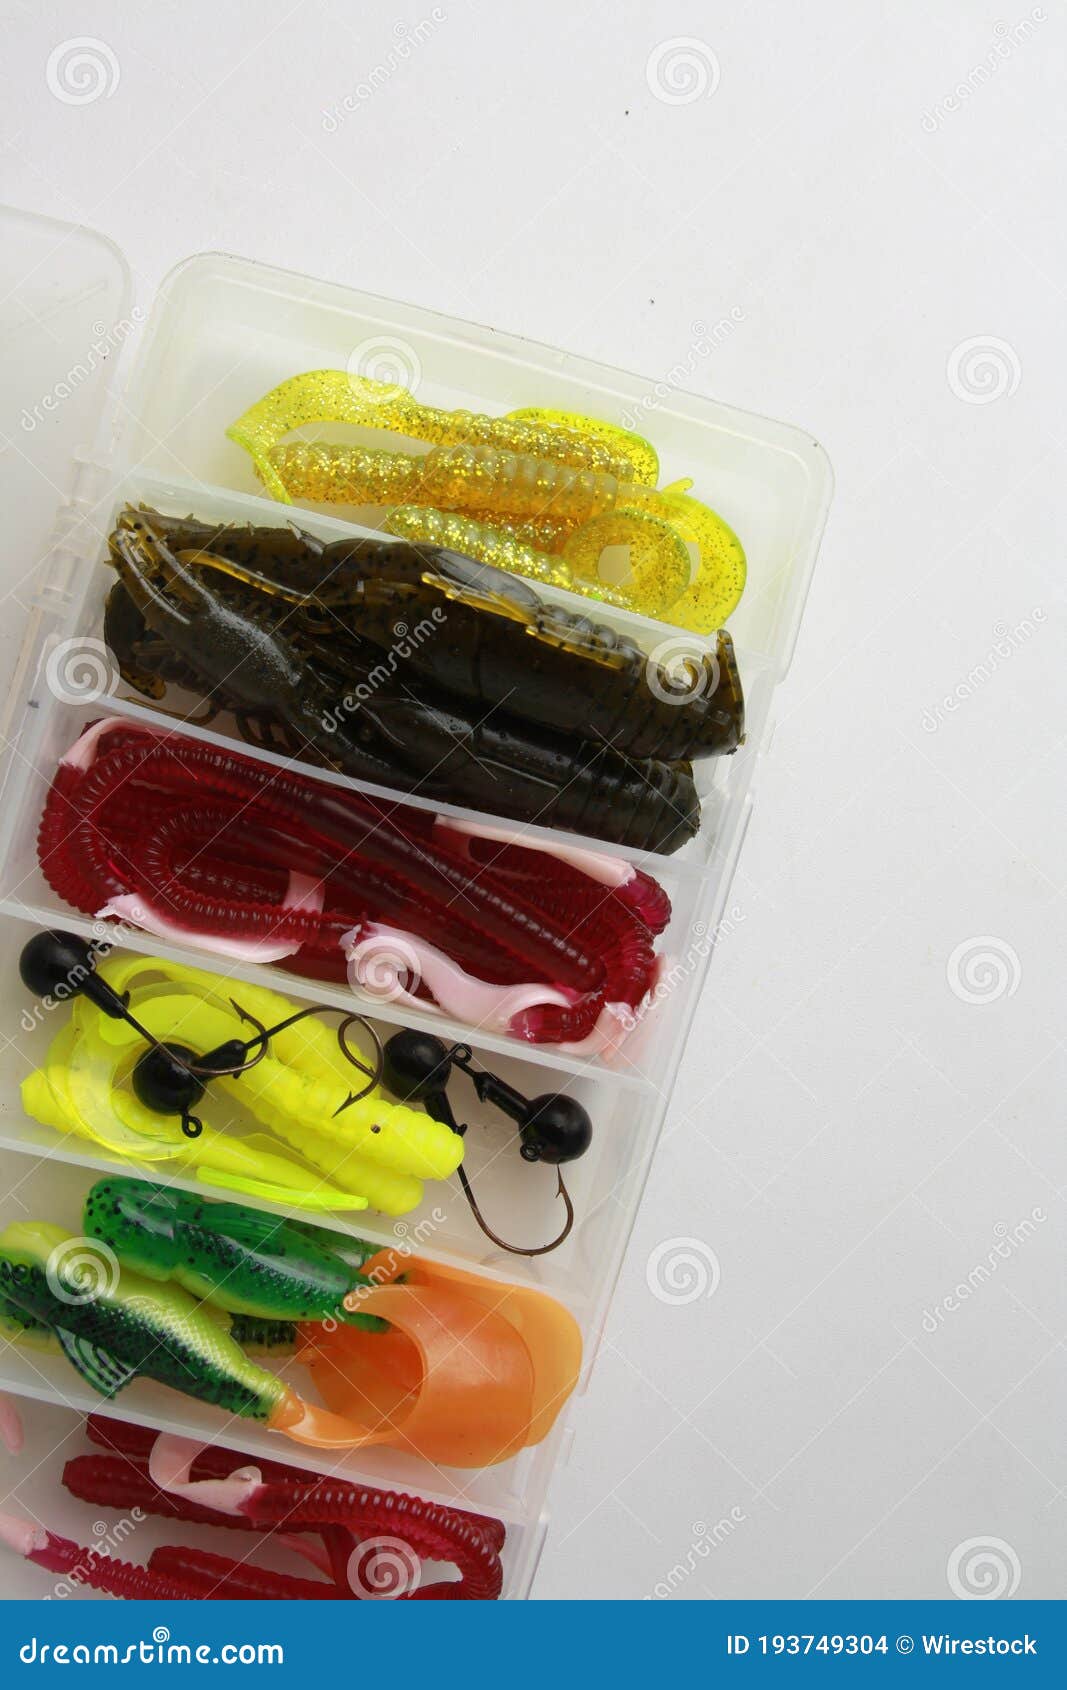 https://thumbs.dreamstime.com/z/top-view-fishing-lure-sets-plastic-box-white-background-193749304.jpg